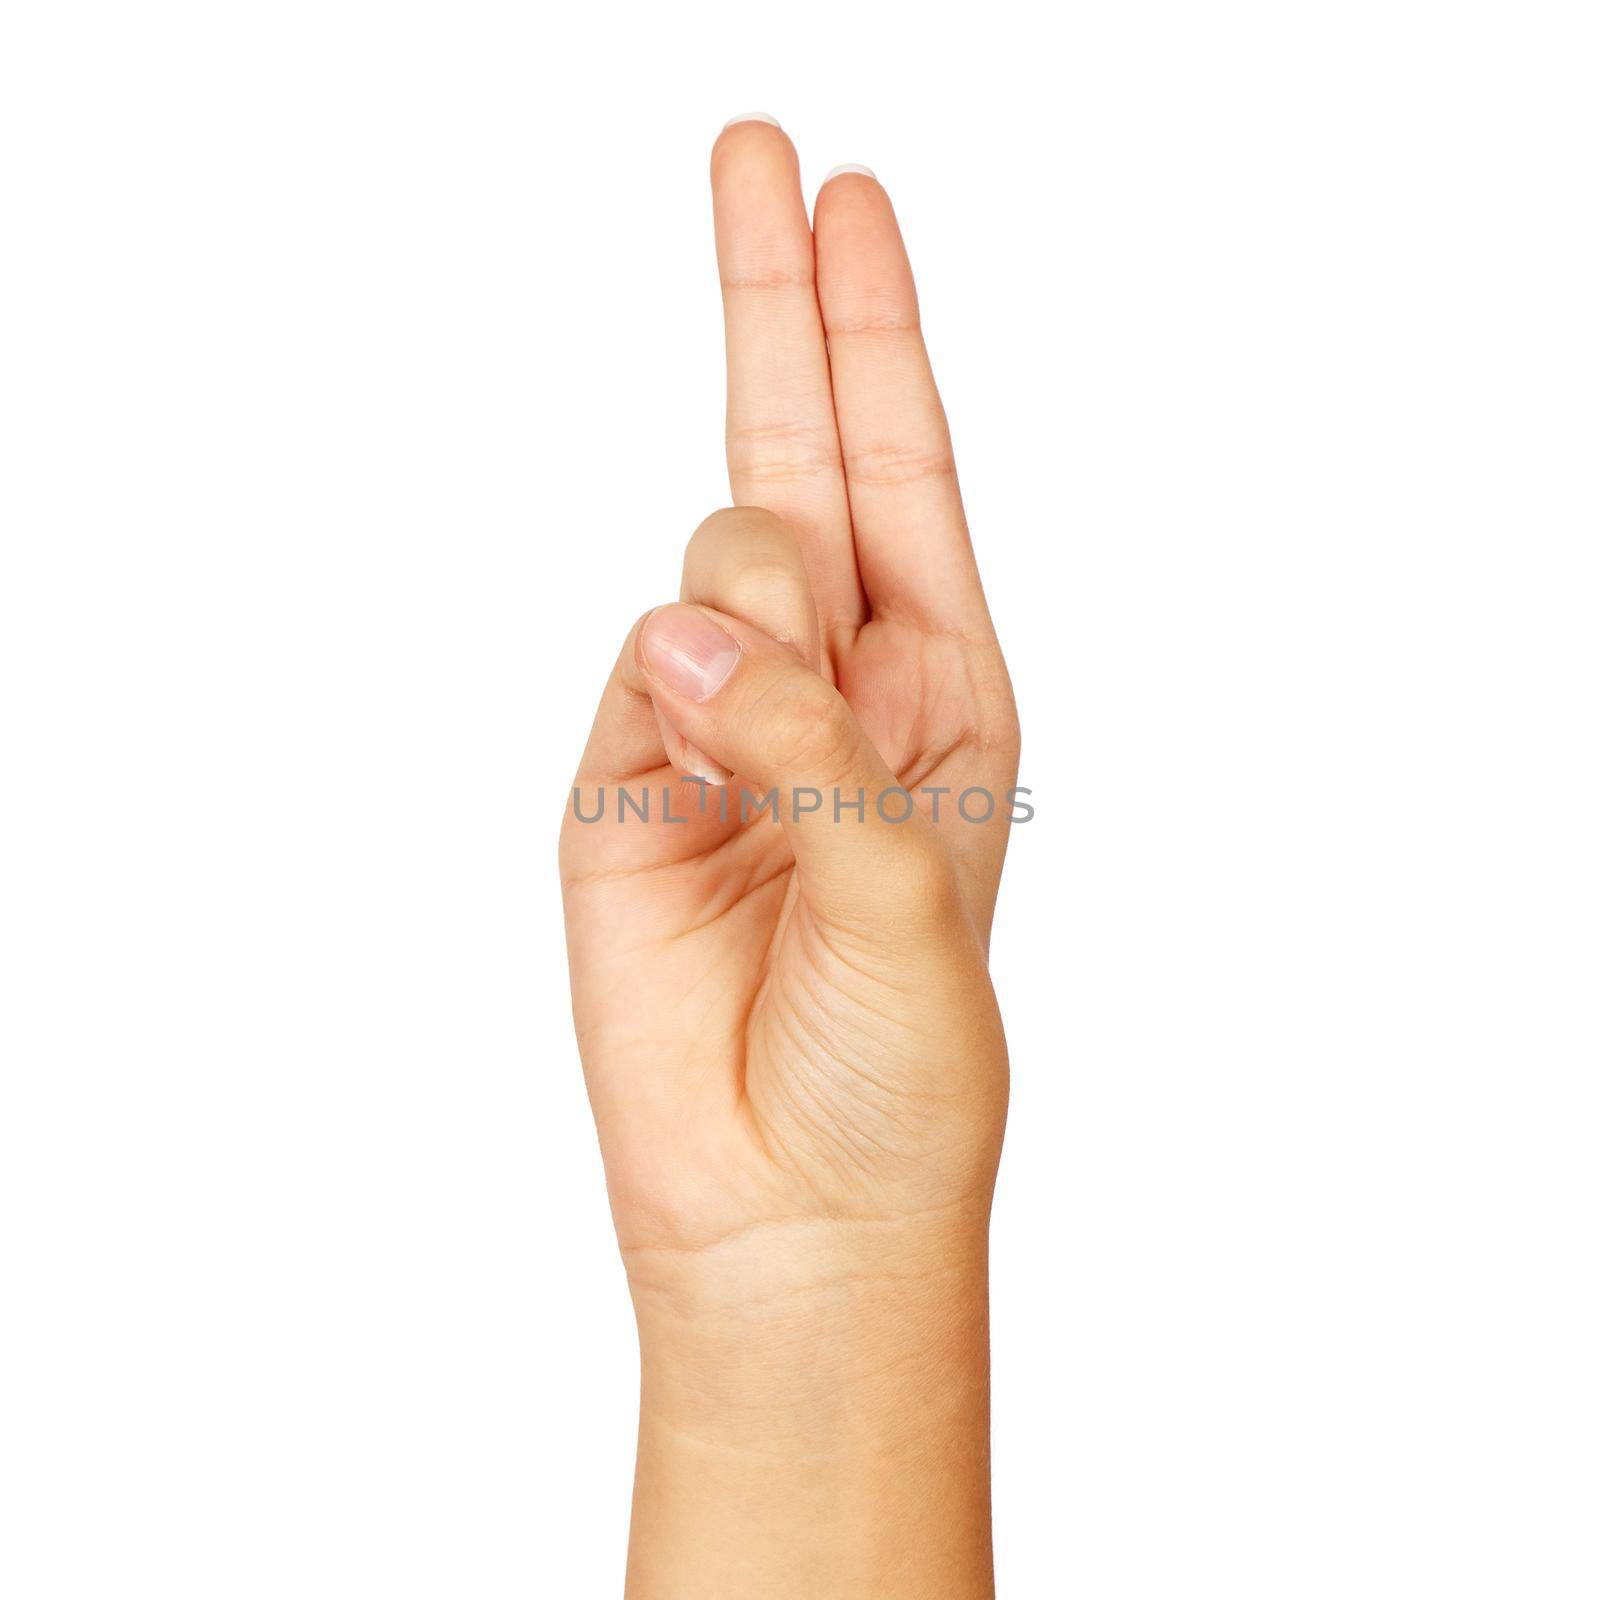 american sign language. female hand showing letter u. isolated on white background